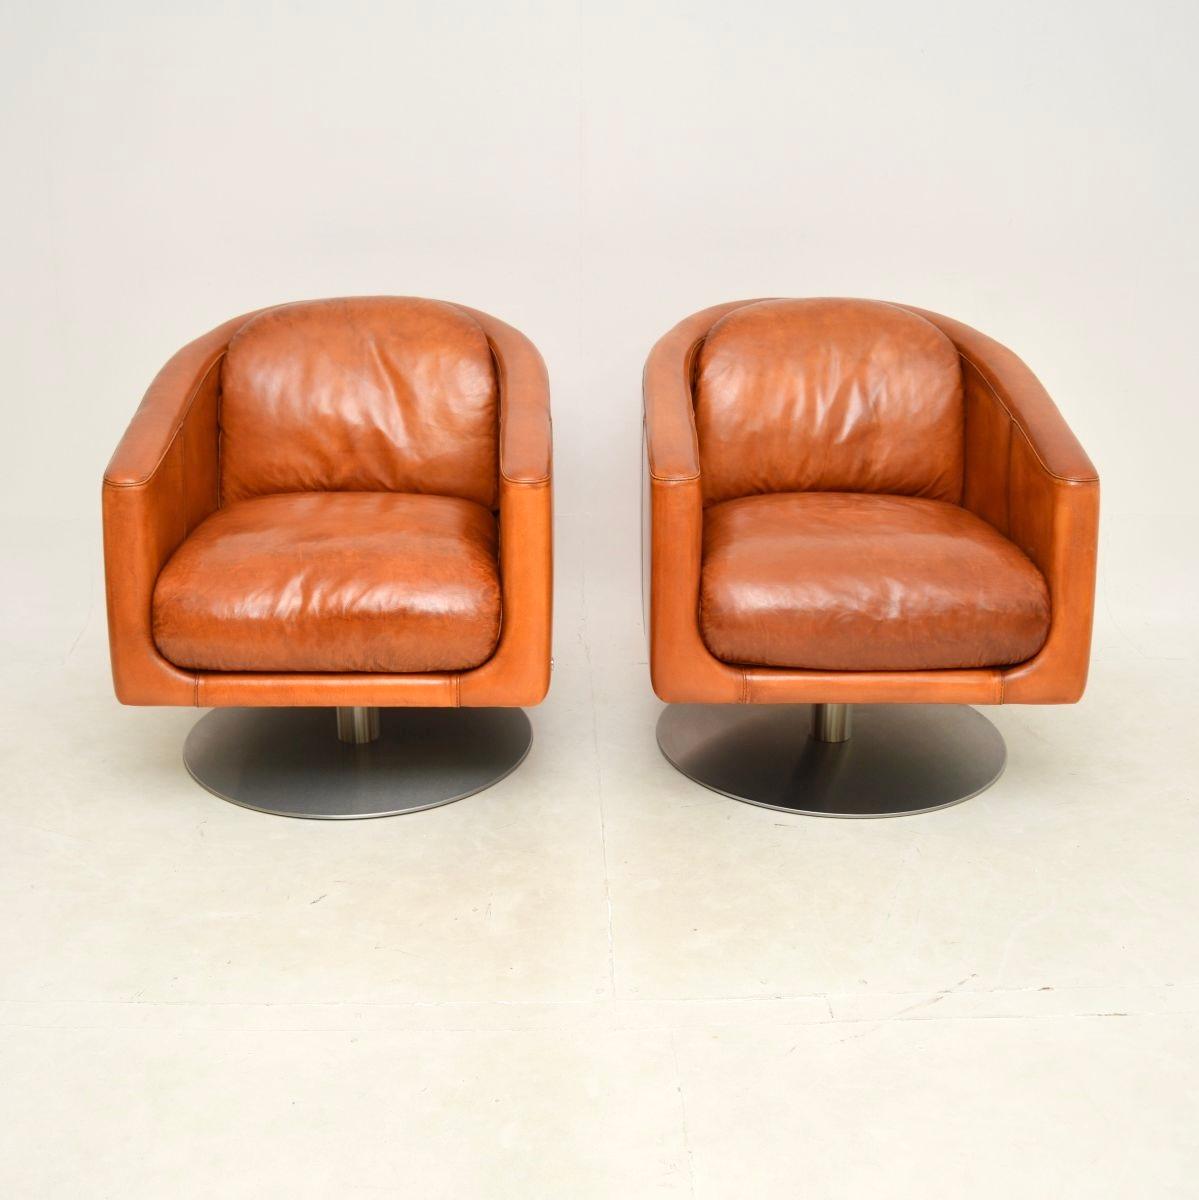 A stylish and extremely comfortable pair of Italian leather swivel armchairs by Natuzzi, dating from the early twenty first century.

They are of absolutely amazing quality, extremely well built and heavy, sitting on brushed steel bases. They are